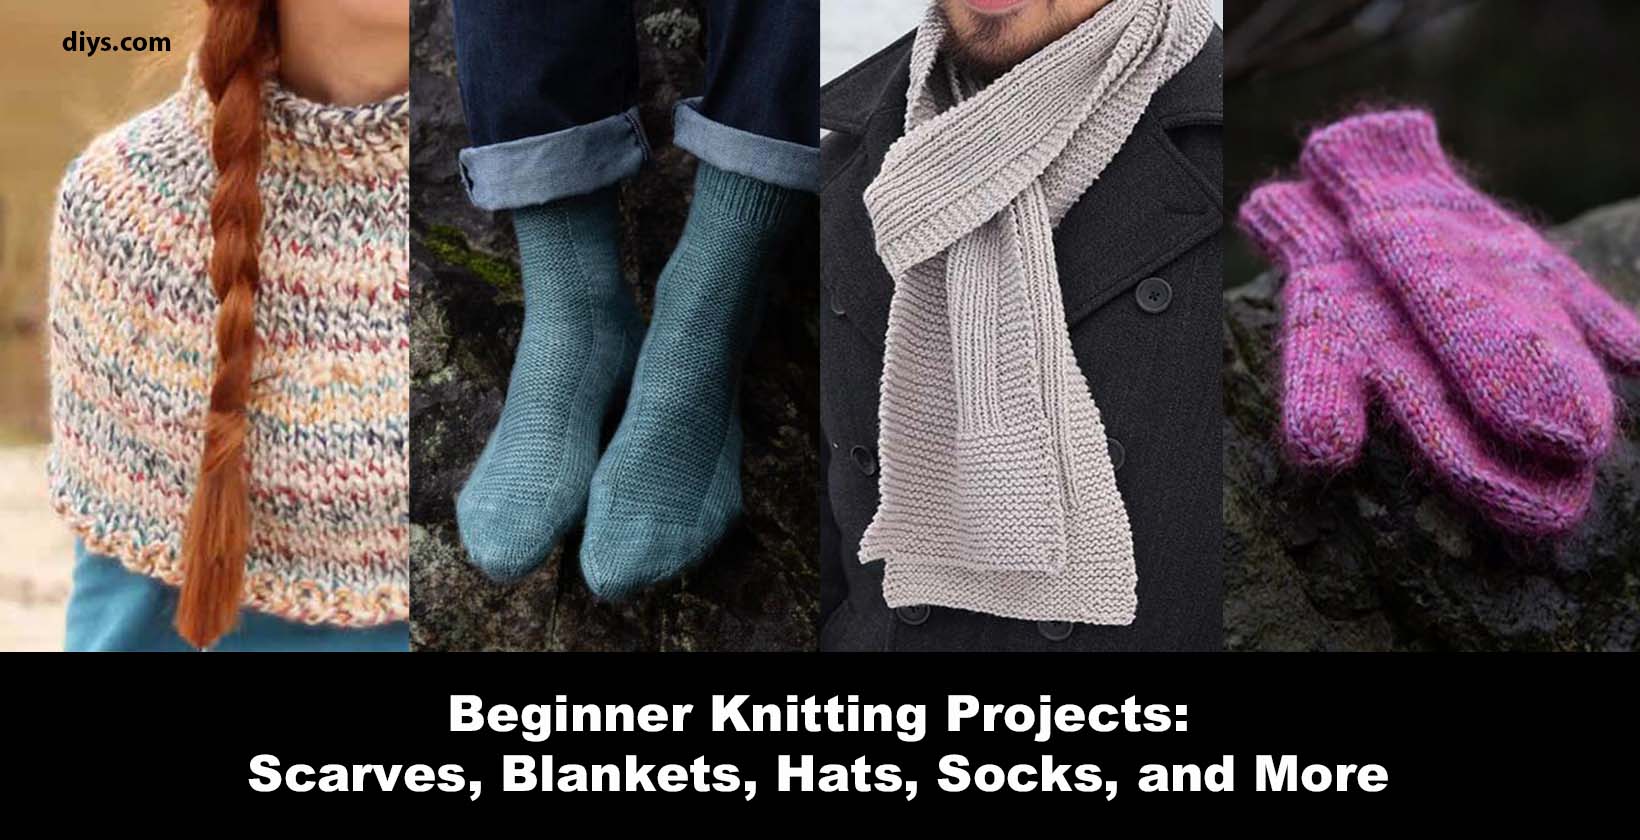 Knitting projects for beginners